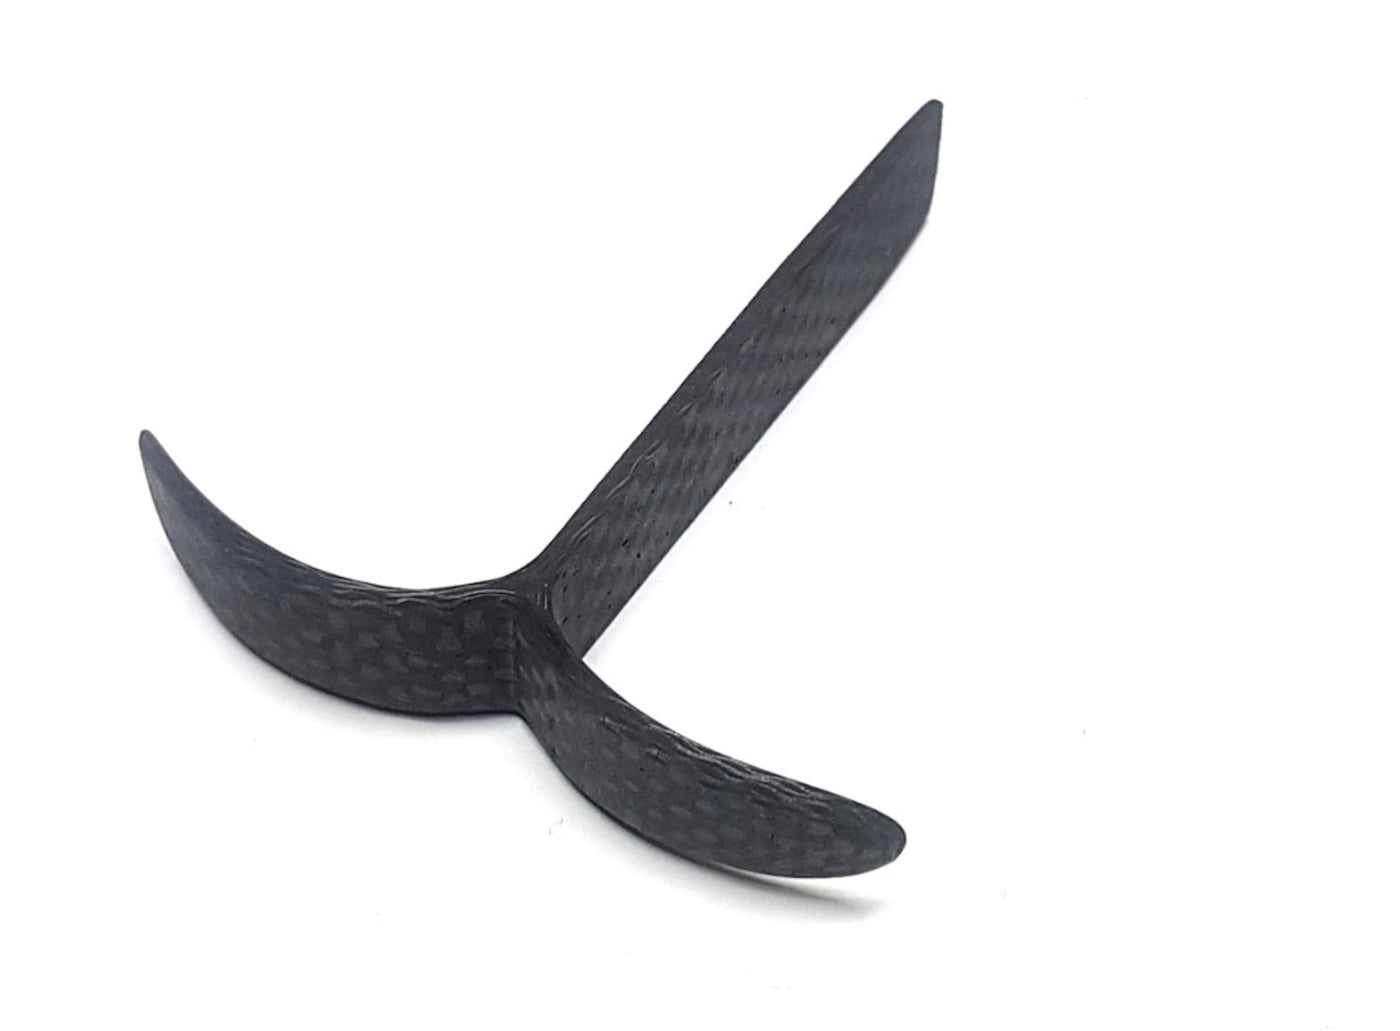 MK Composites Curved Carbon DLG Throwing Blade